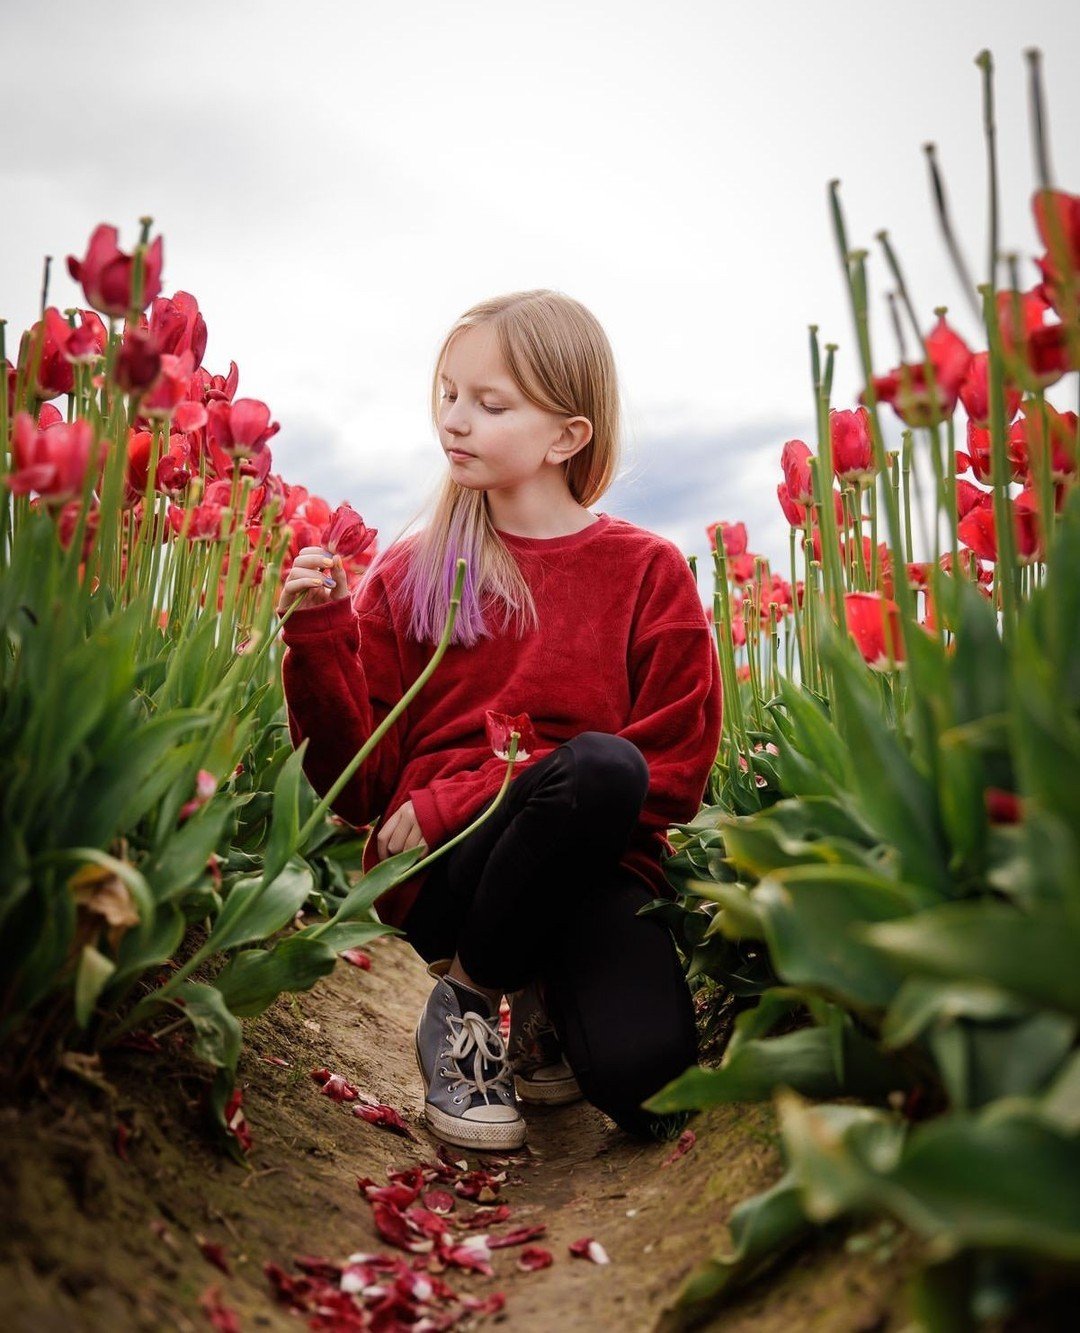 Did you know the Wooden Shoe Tulip Farm and Festival is one of the top spring attractions in Oregon?! Truthfully, I'm not surprised by this. These tulip fields in the spring are absolutely breathtaking and if you haven't had a chance to see them for 